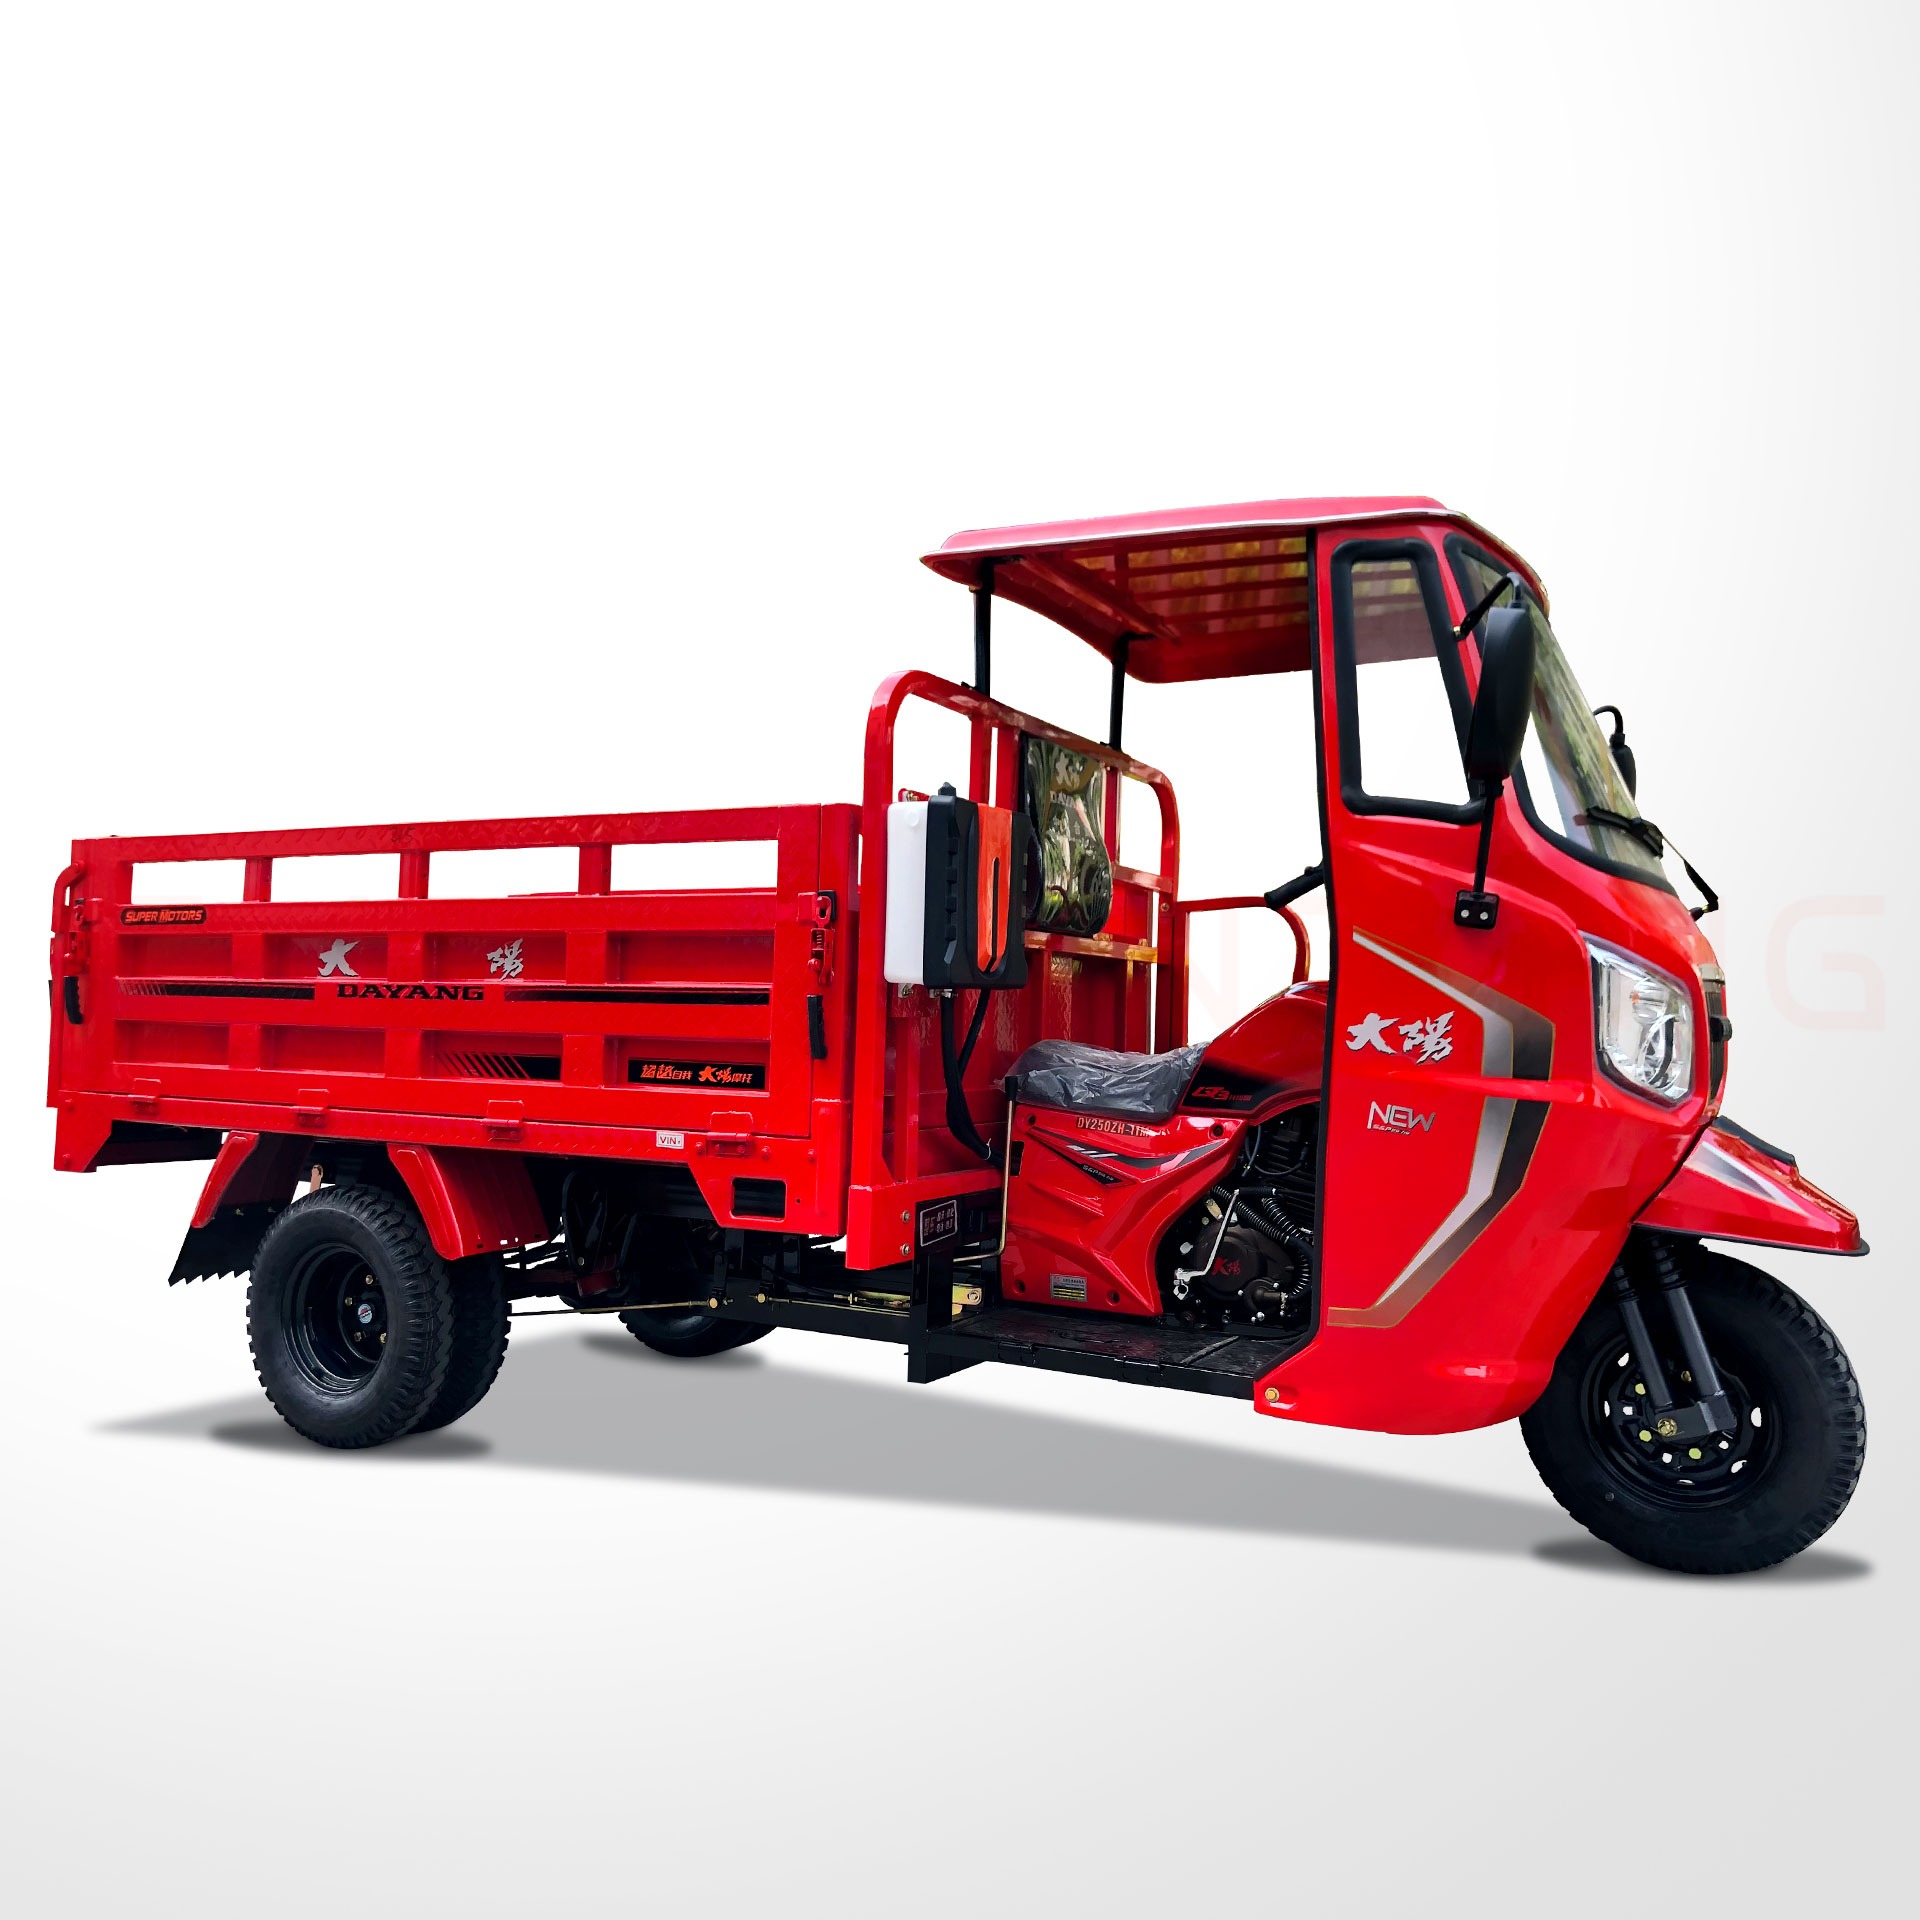 Hot selling heavy loading semi cabin 250cc motorized big wheel open cargo tricycle for sale  Water Cooling Customized